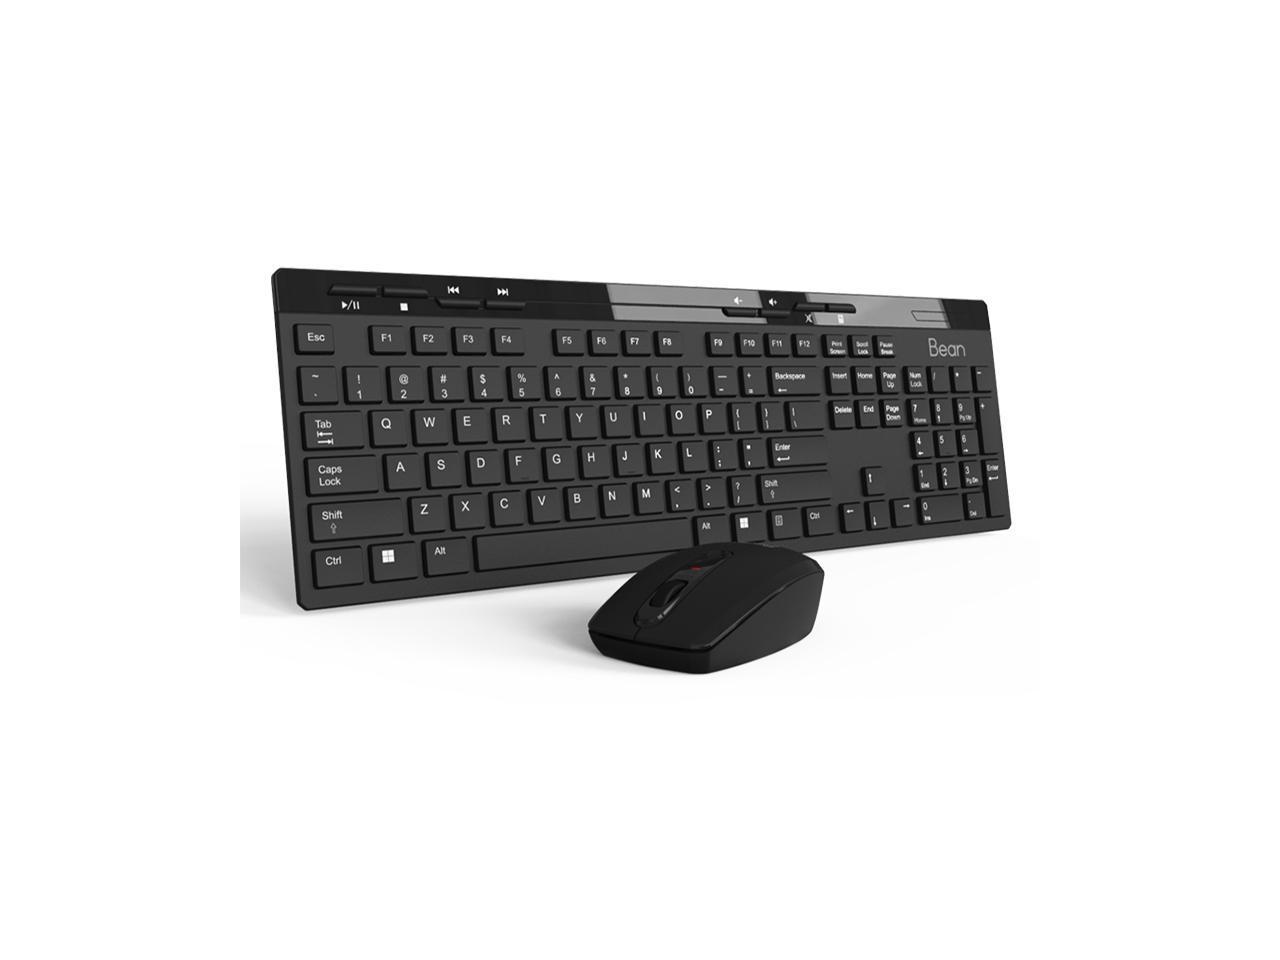 Wireless Keyboard and Mouse Combo on sale for $14.84 at Newegg.